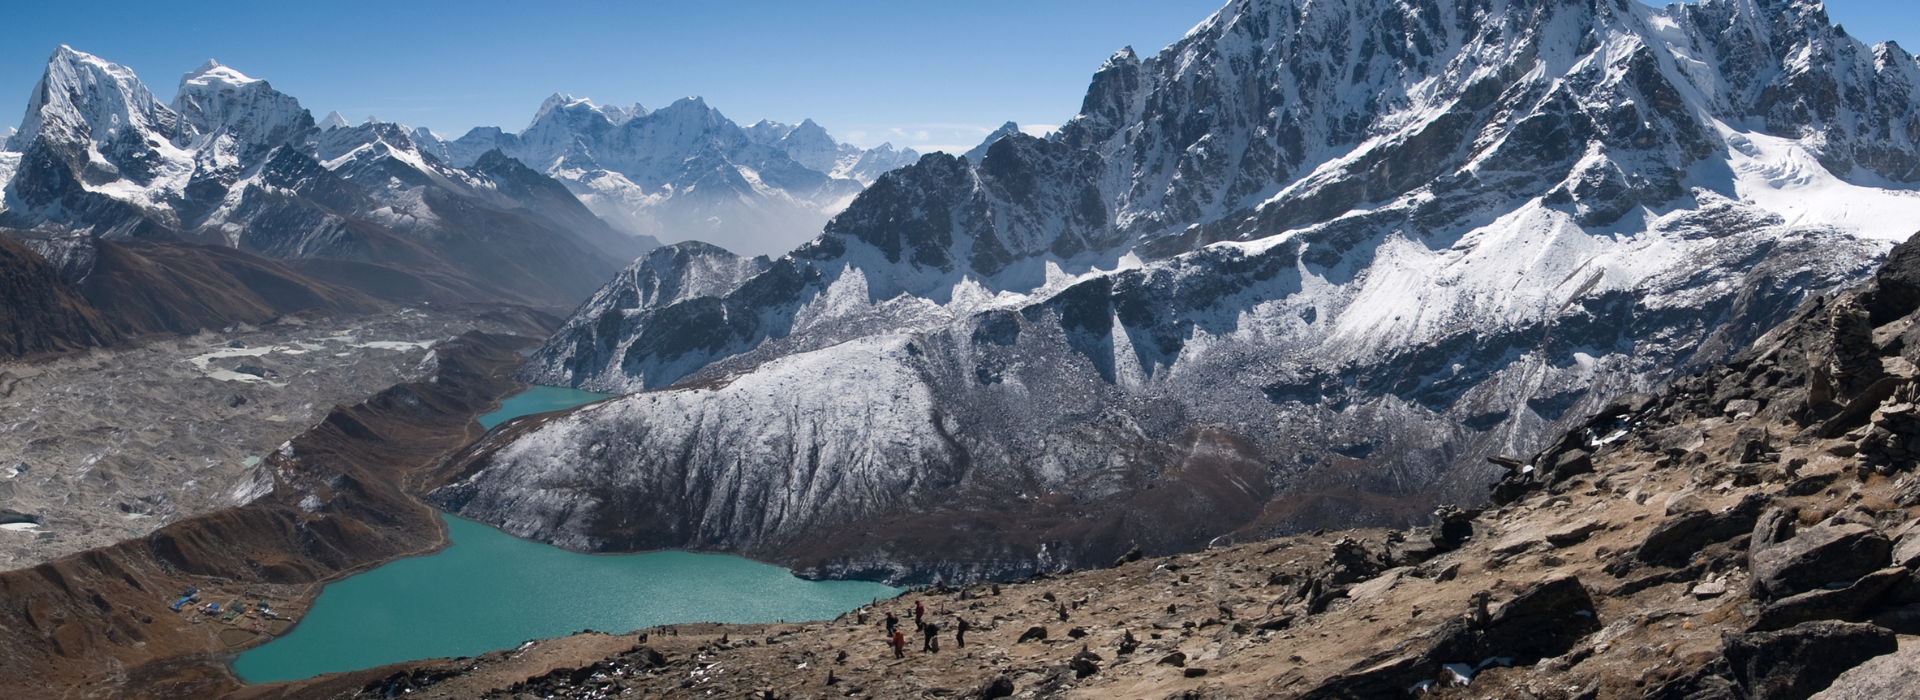 View of turquoise Gokyo Lakes and mountains in Nepal